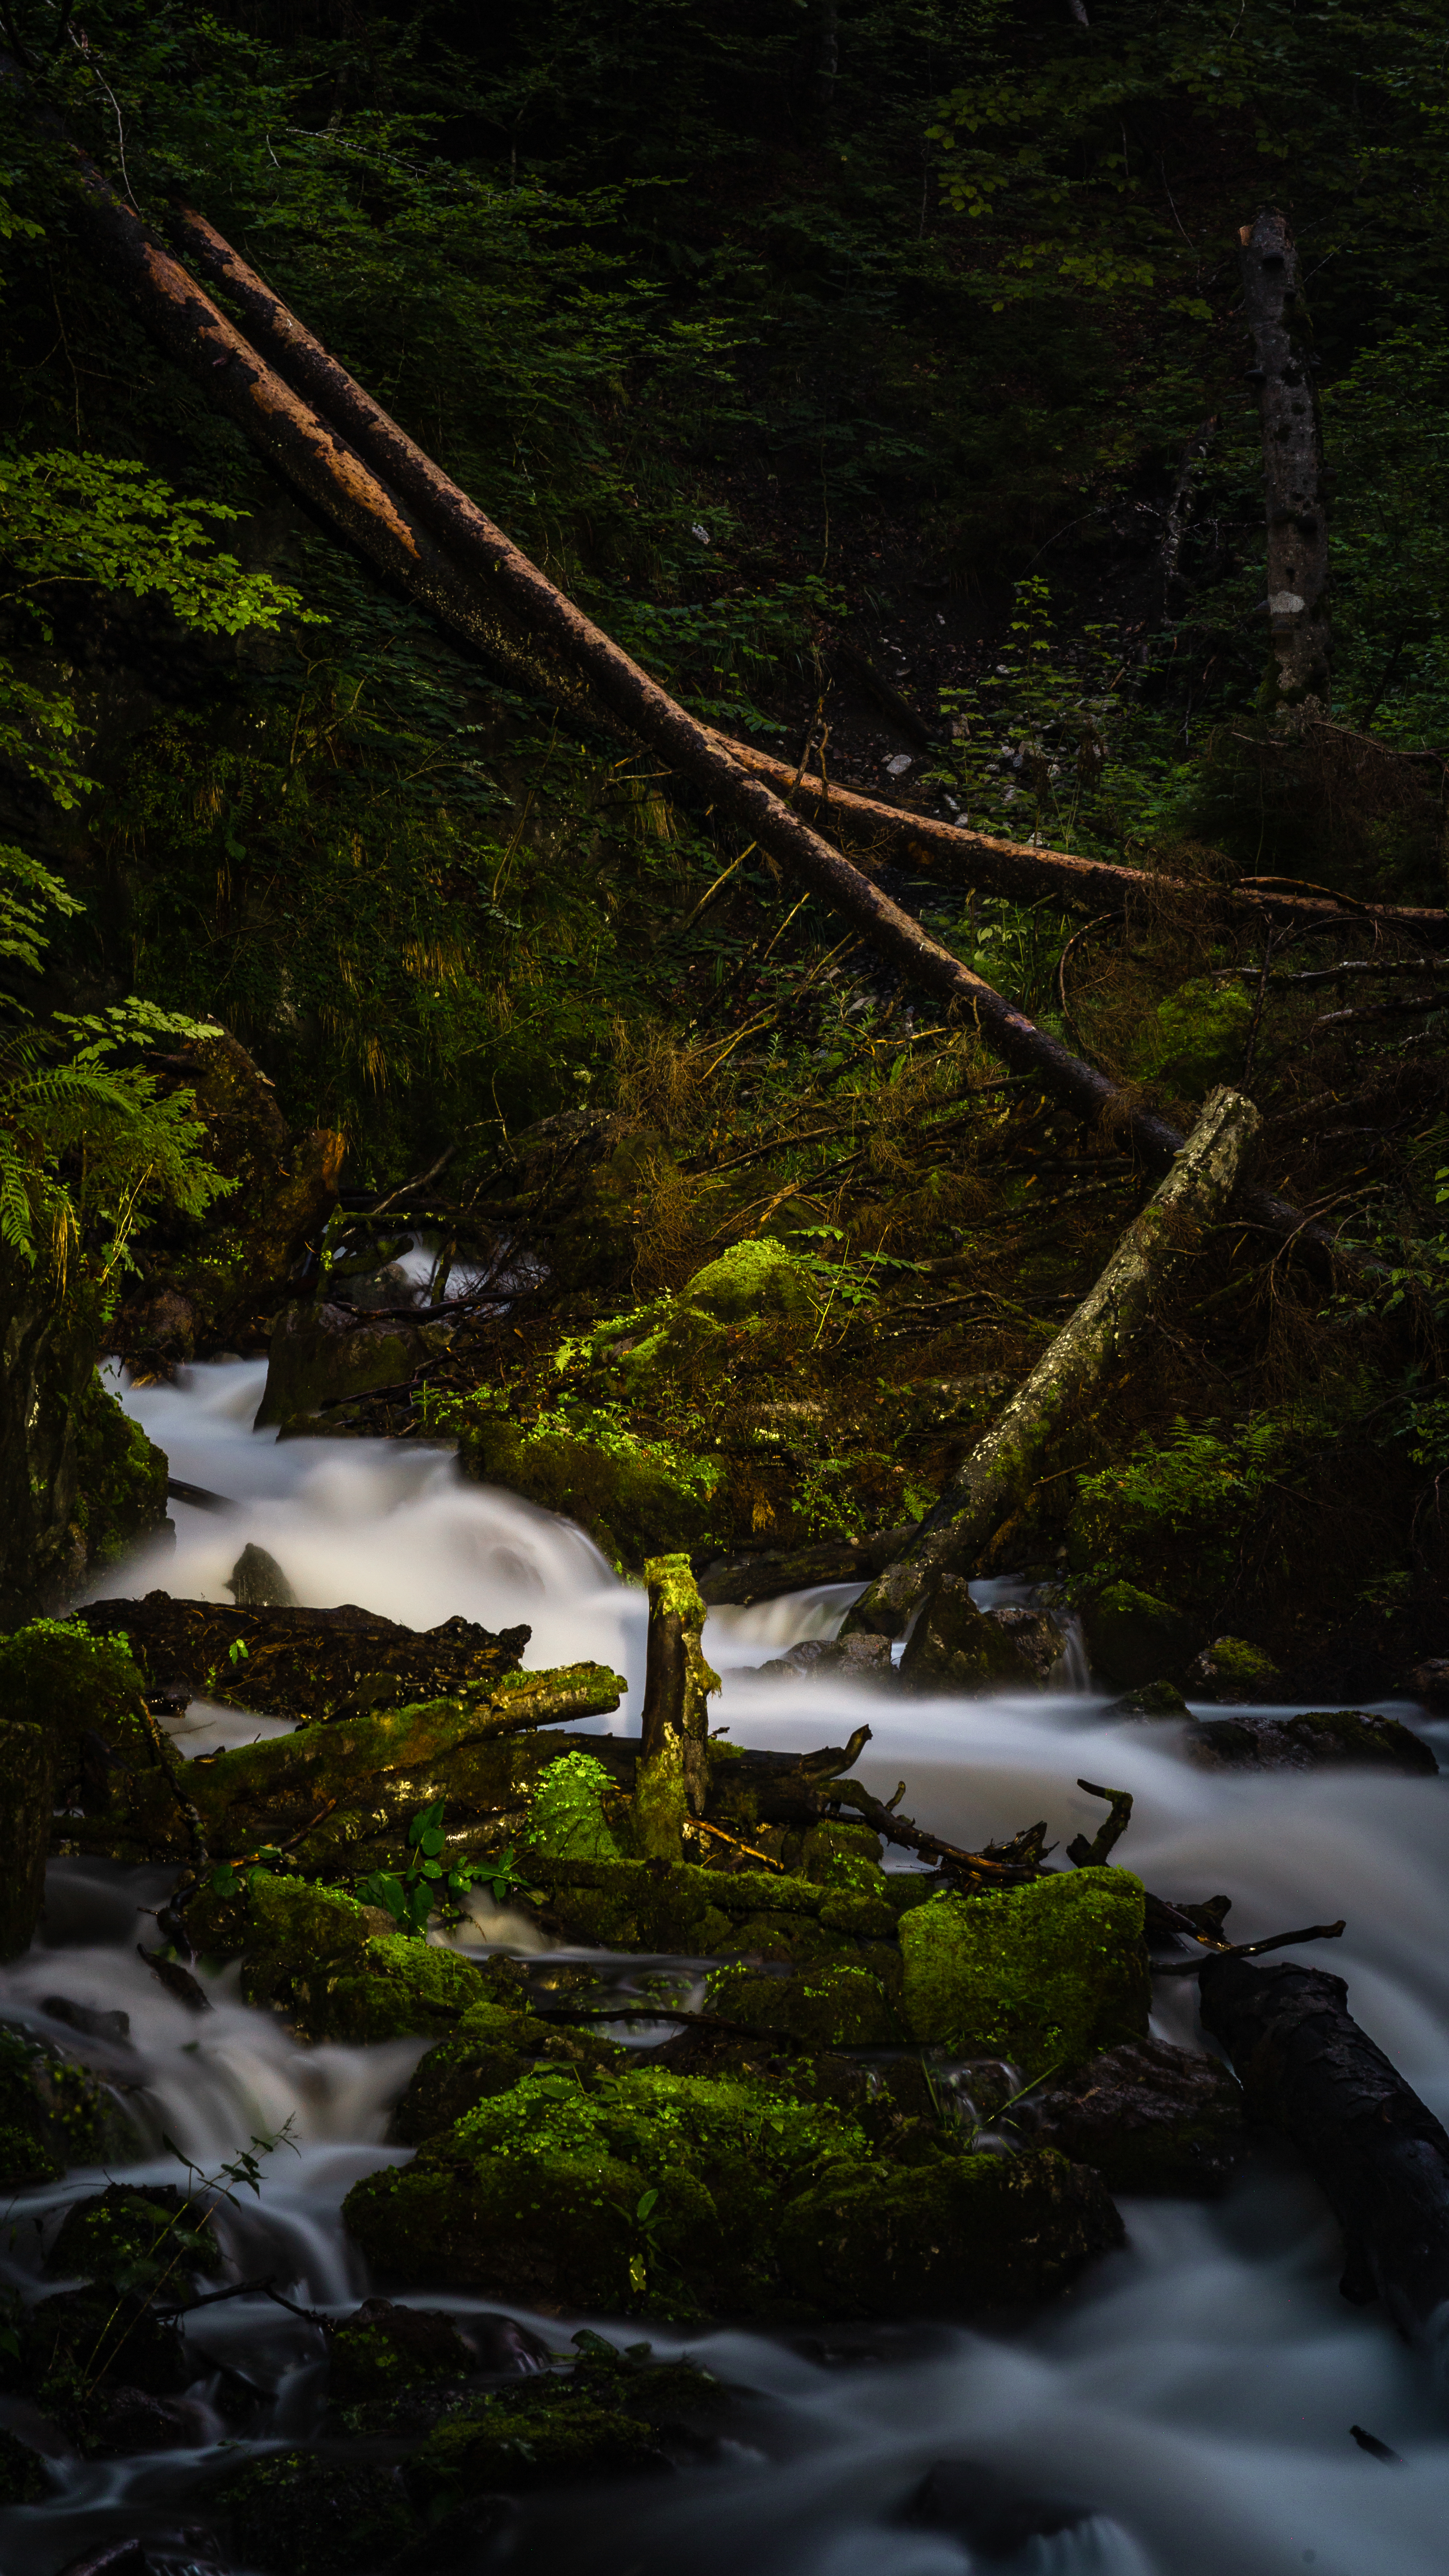 moss, nature, rivers, stones, branches, flow, stream wallpaper for mobile